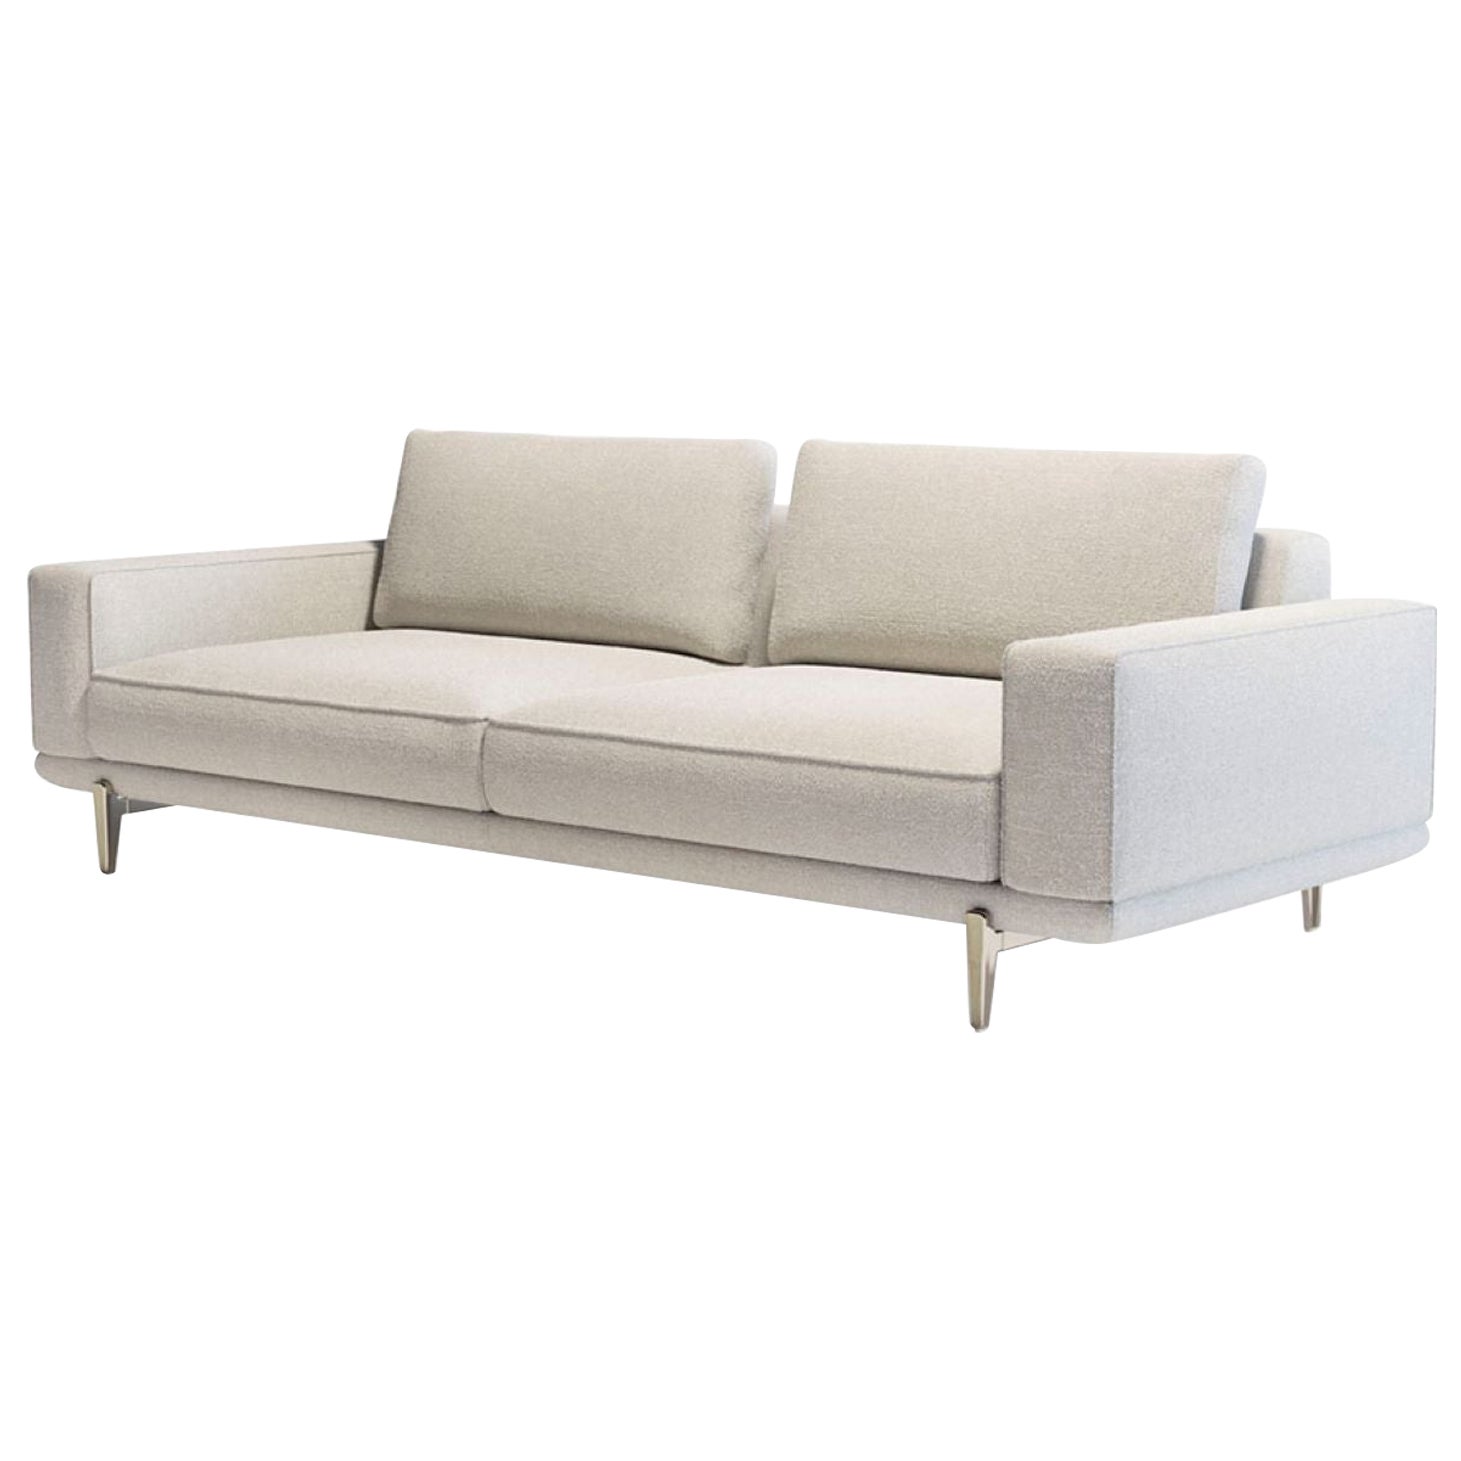 Stylish Sofa 2 Seater 3 Seater or Modular Frame Solid Timber Backrest Pillows